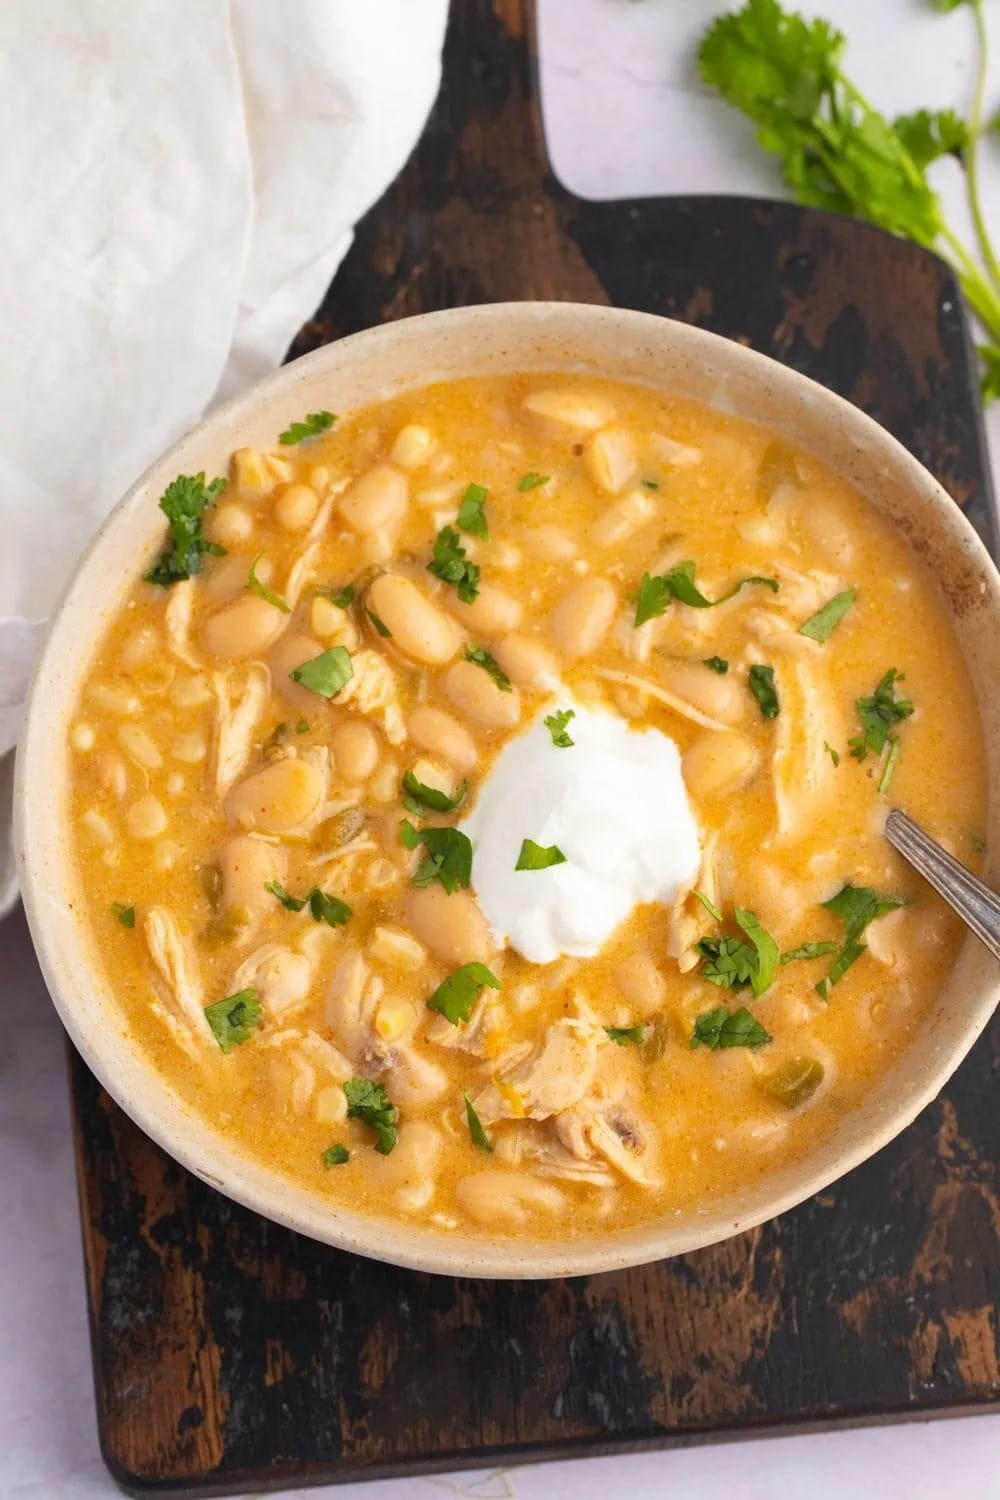 Chicken chili with beans, stock and chicken meat topped with cream served on a white bowl.